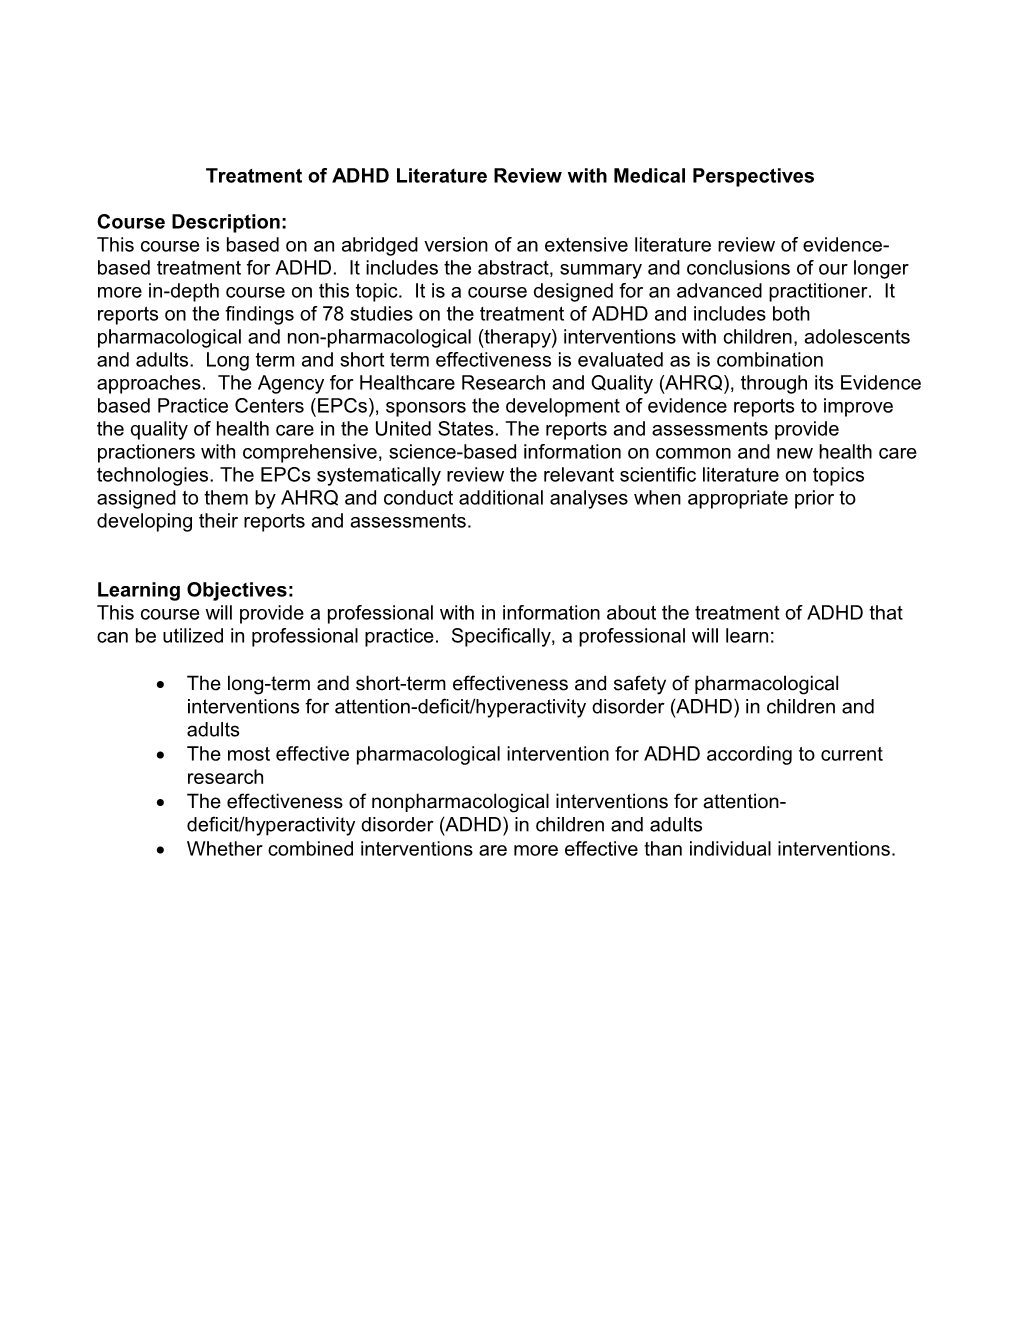 Treatment of ADHD Chapter 4 Only Conclusions